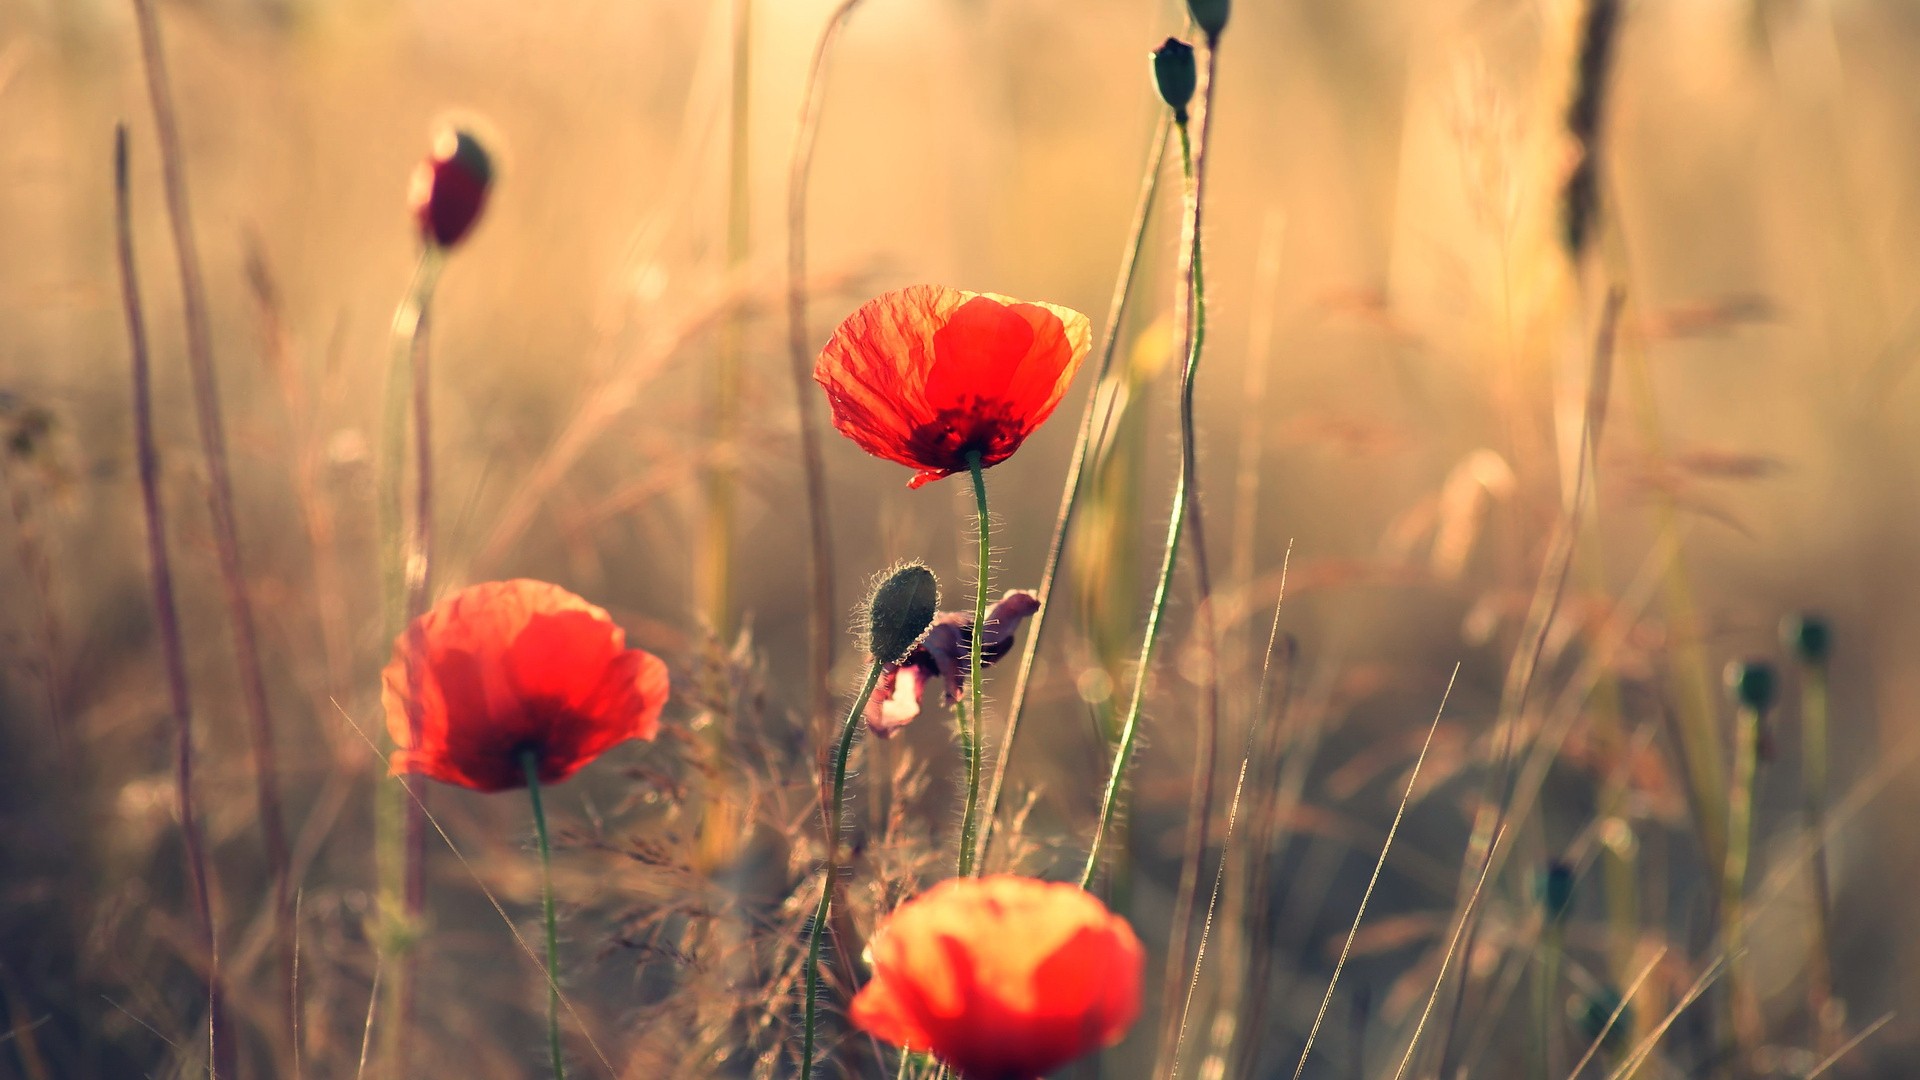 General 1920x1080 flowers poppies red flowers plants sunlight outdoors